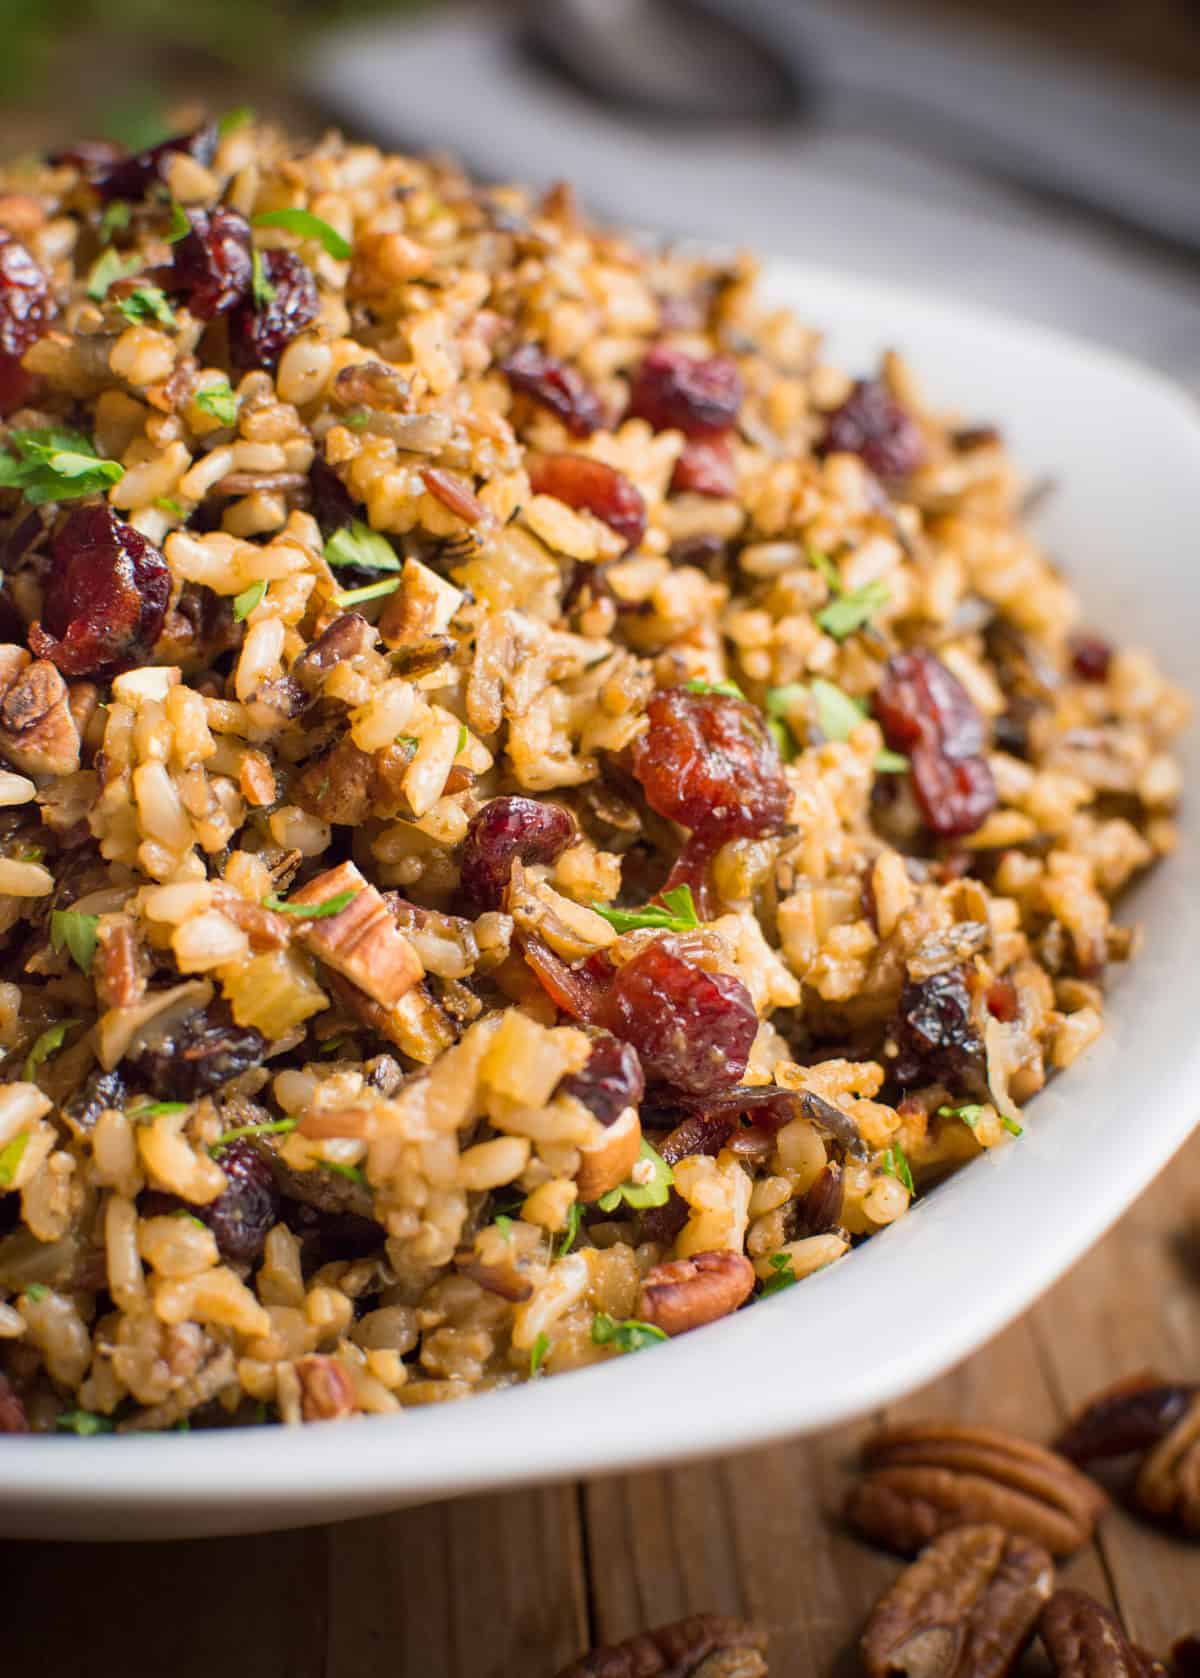 Wild rice stuffing with dried cranberries and toasted pecans in a white bowl.